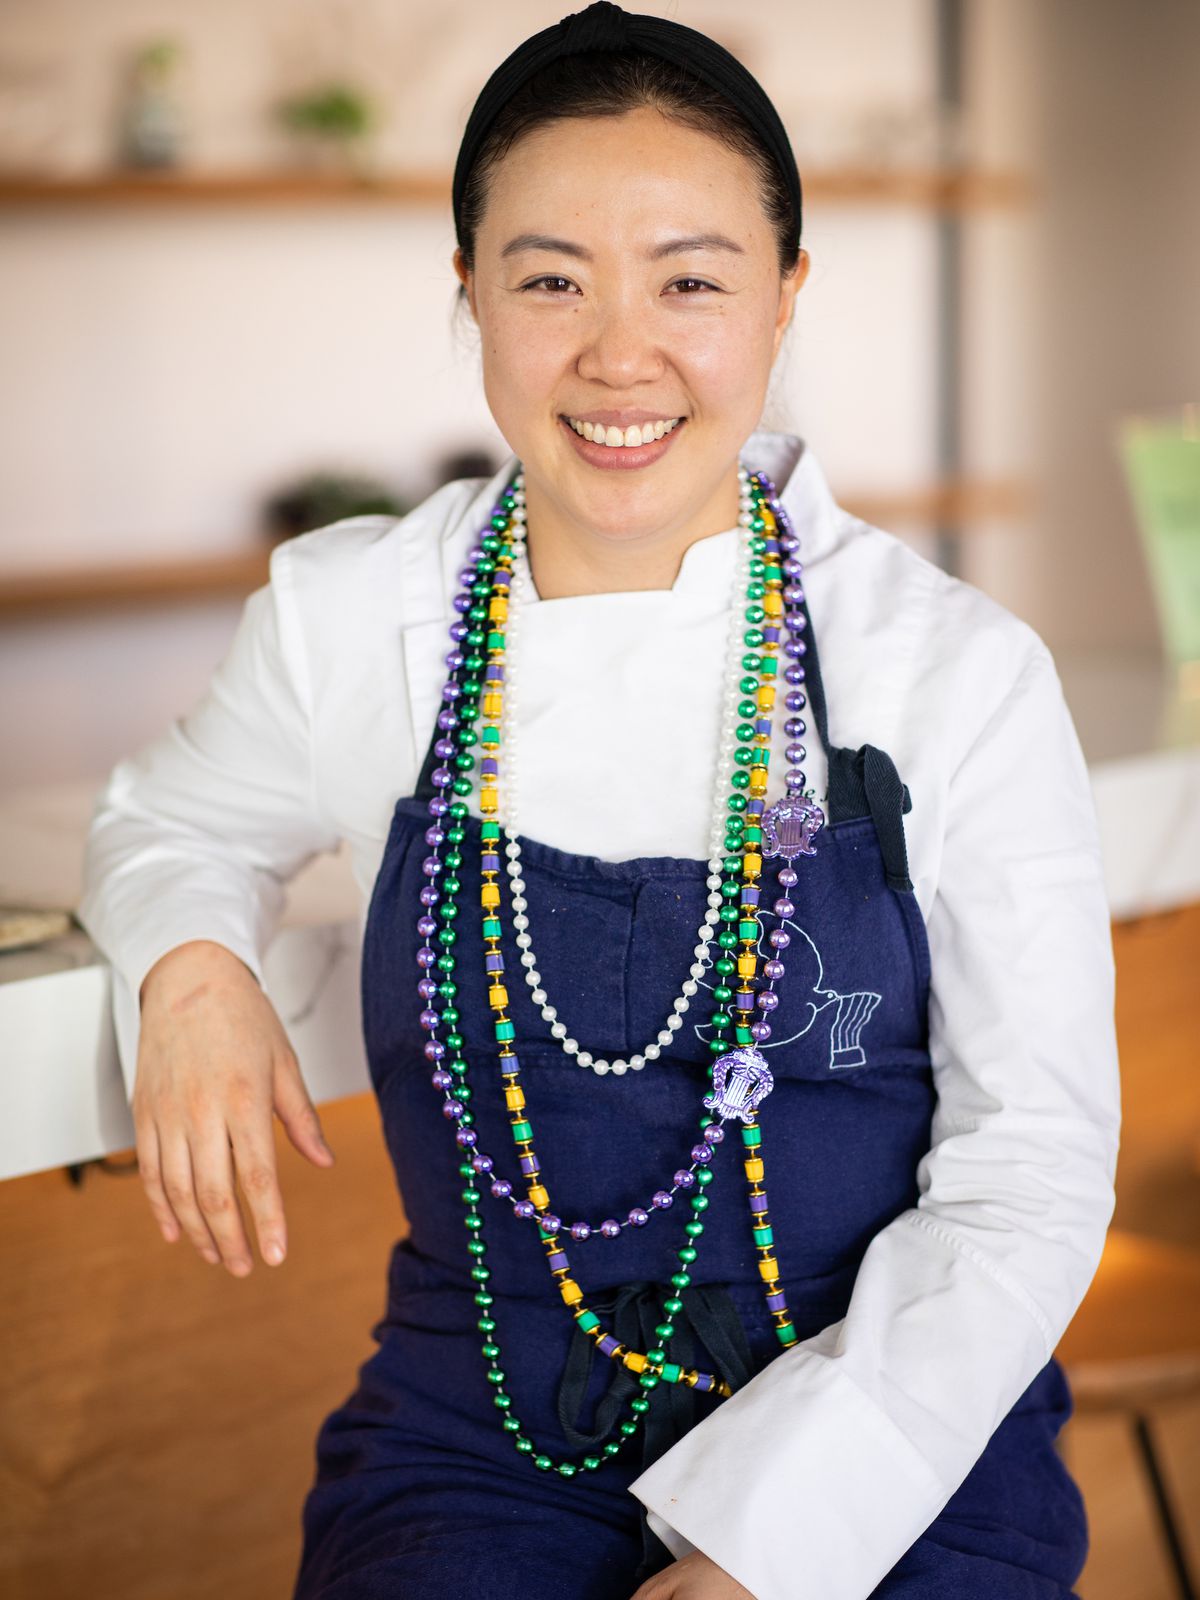 A woman smiling at the camera wearing Mardi Gras beads, a blue apron, and a white chef’s coat